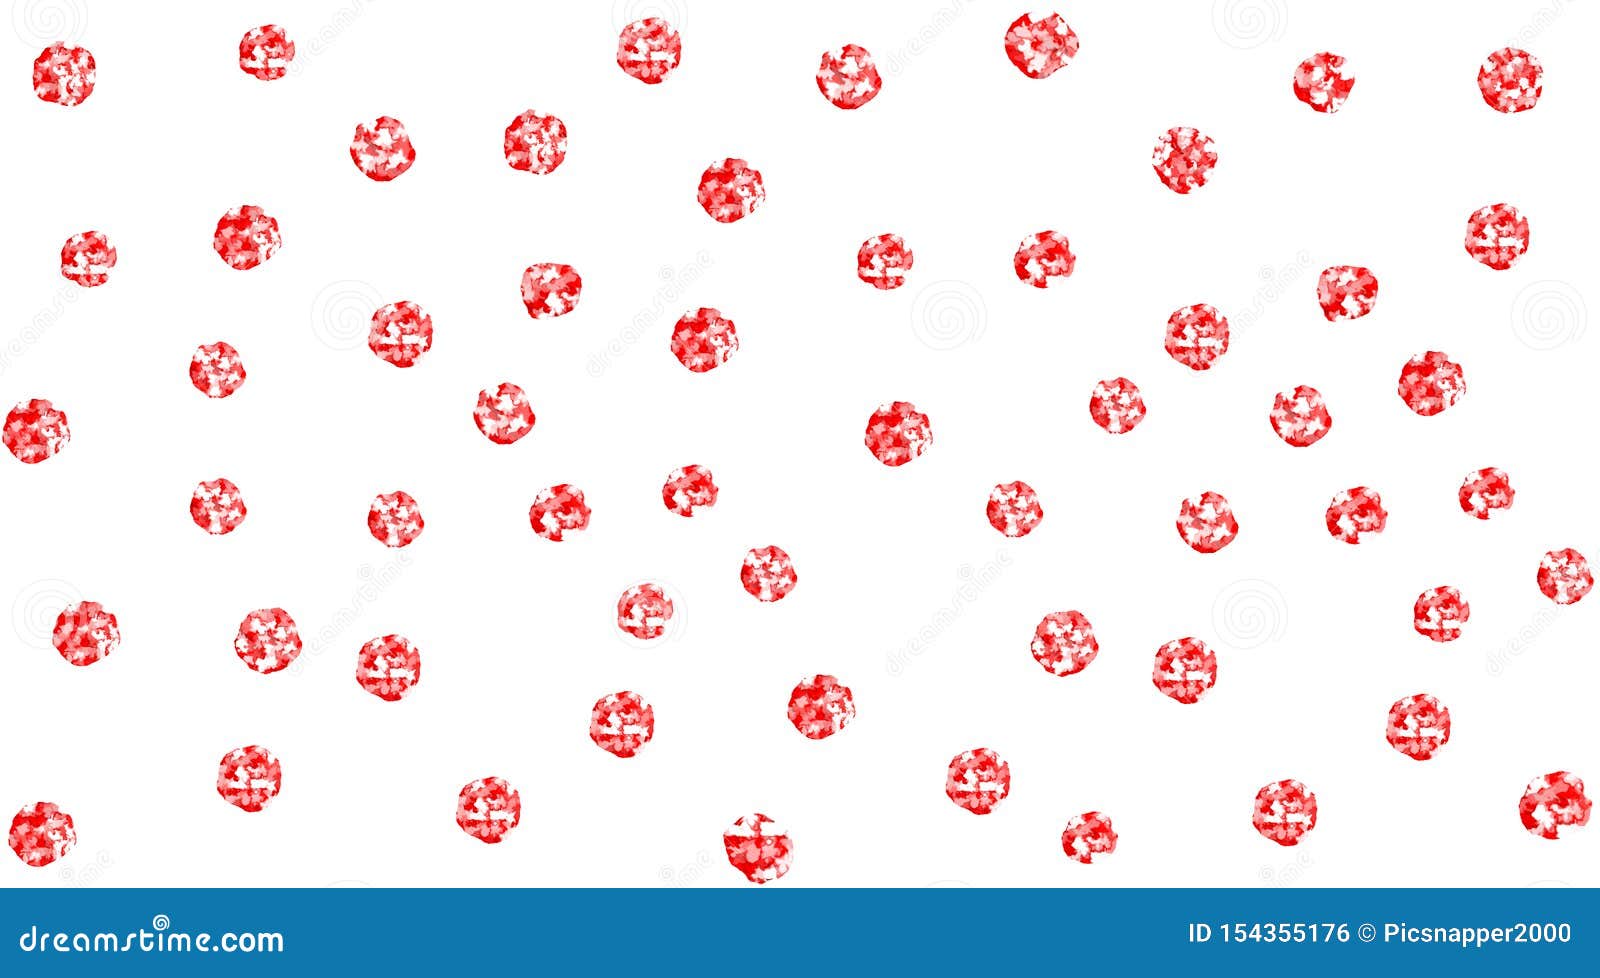 Dots Png Red Stock Illustrations – 102 Dots Png Red Stock Illustrations,  Vectors & Clipart - Dreamstime